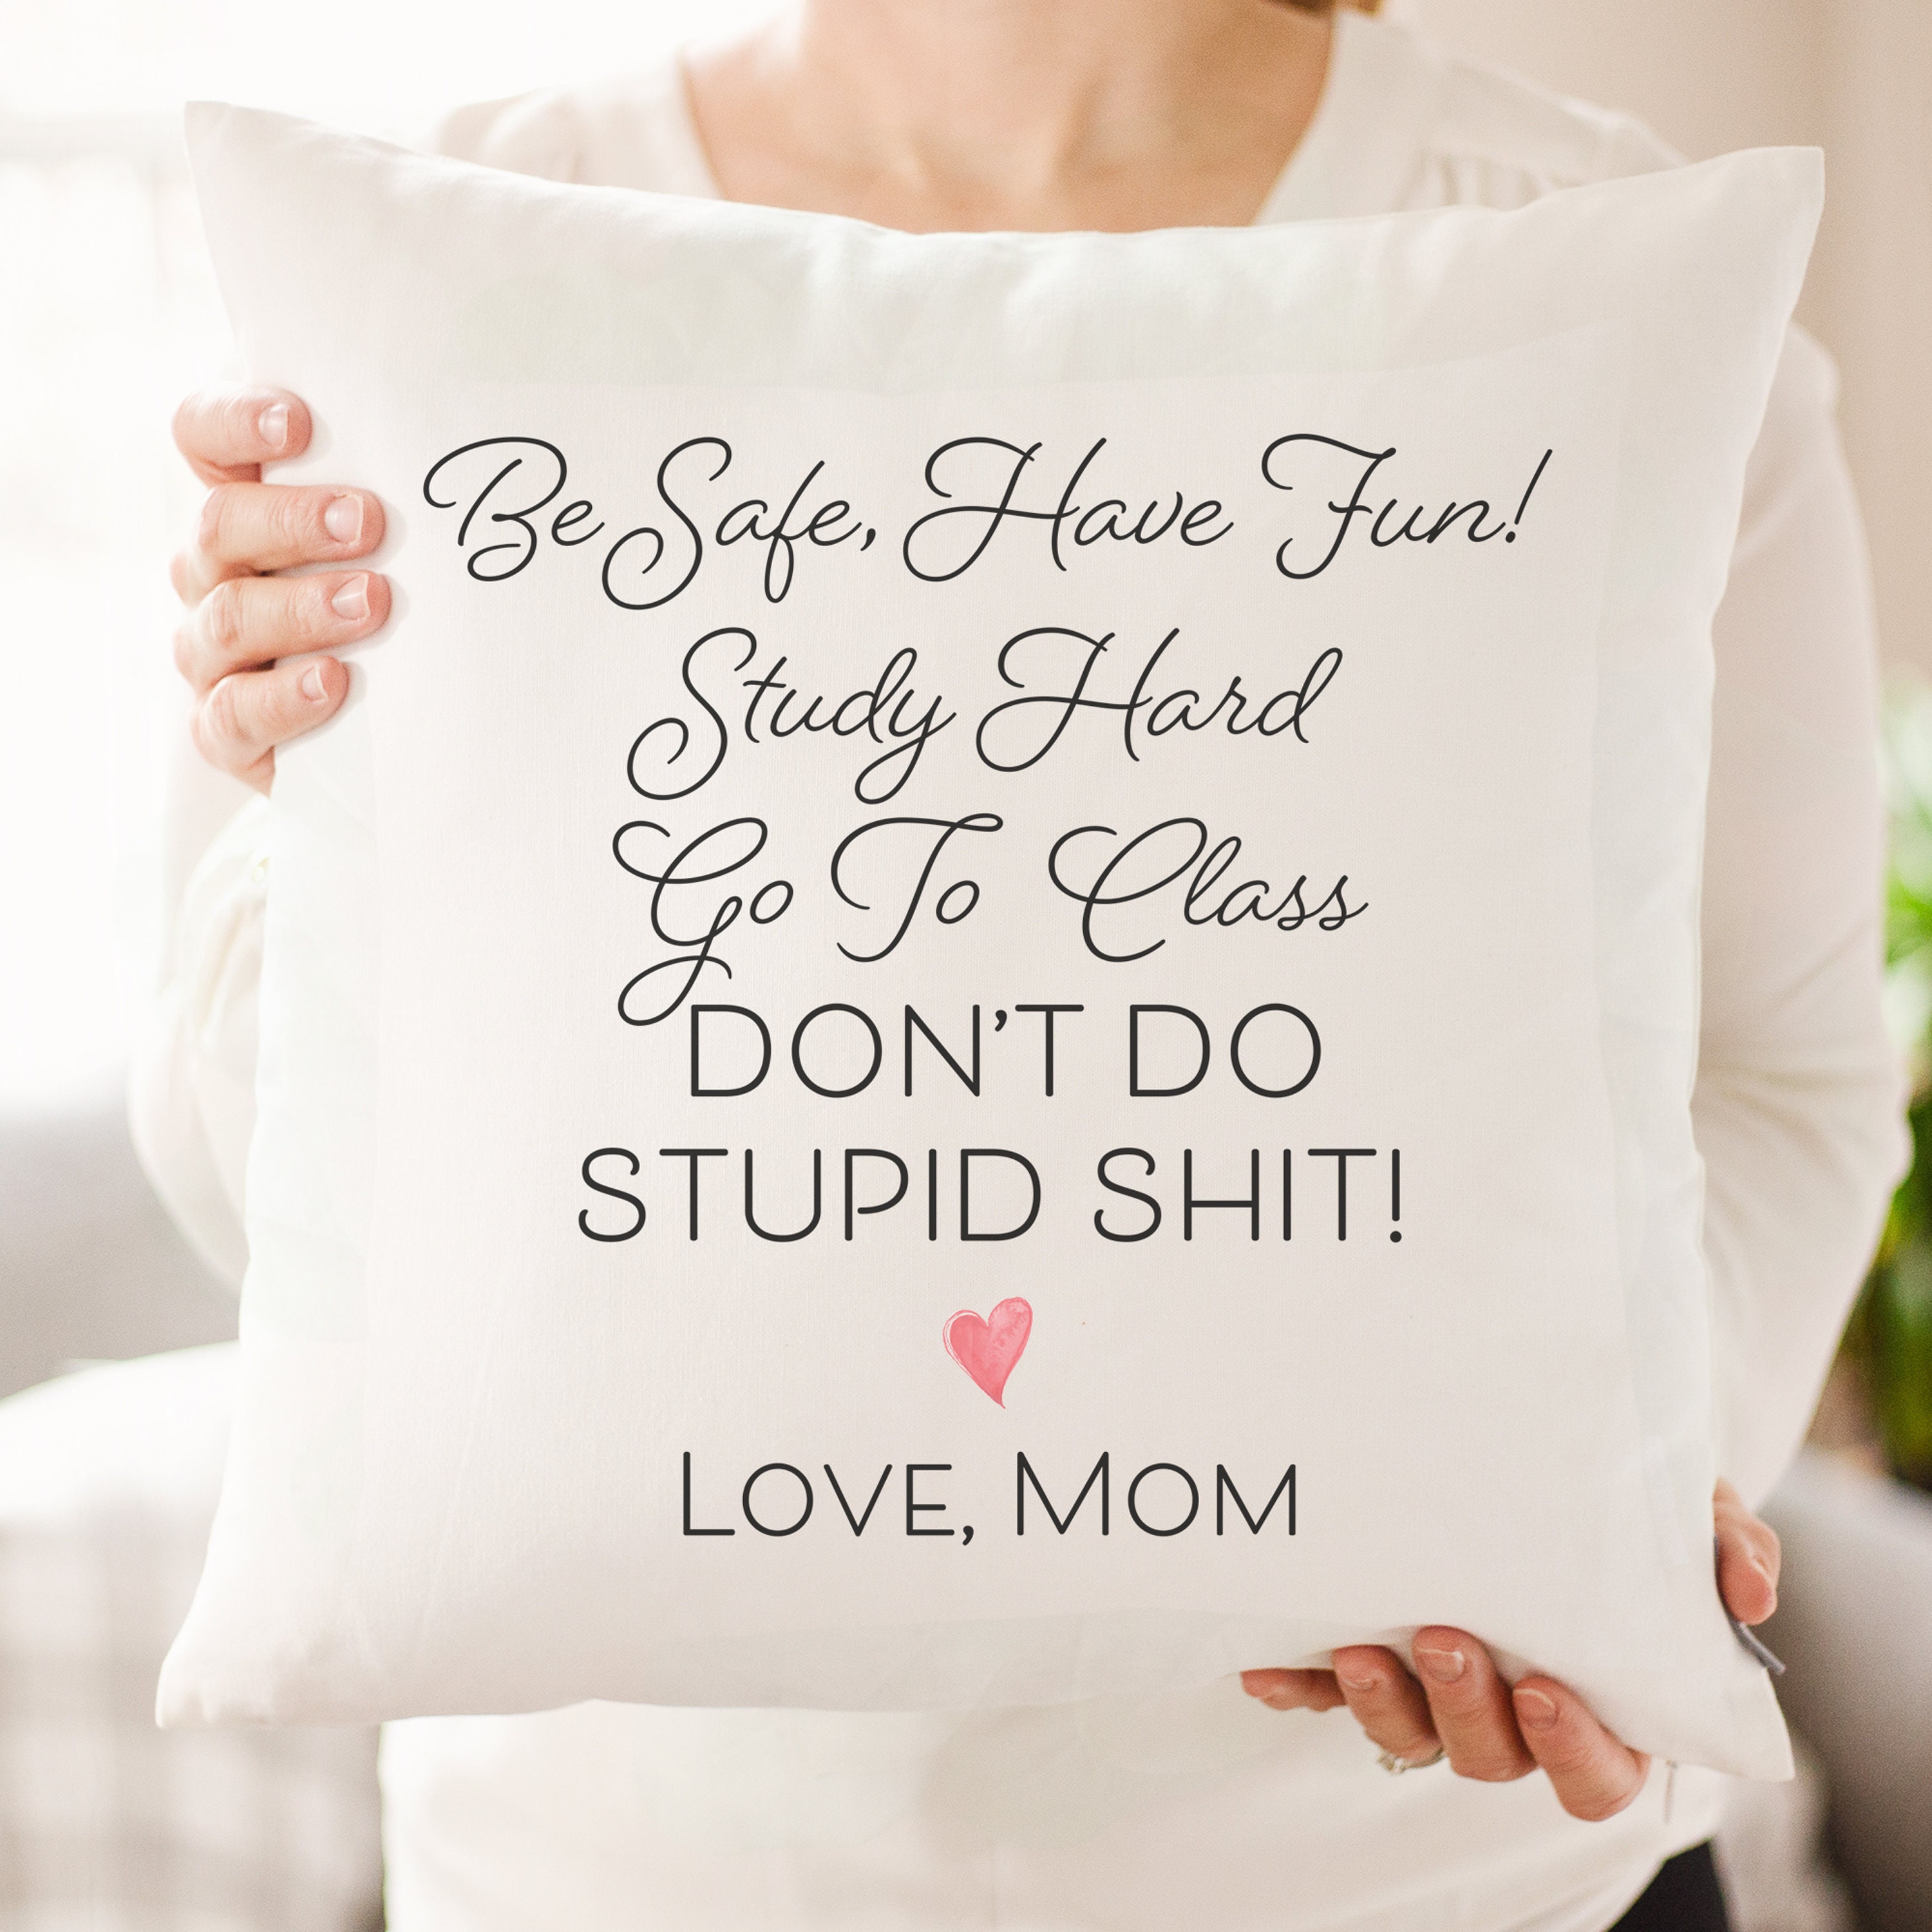  Have Fun, Be Safe, Don't Do Stupid Sh*t : Handmade Products